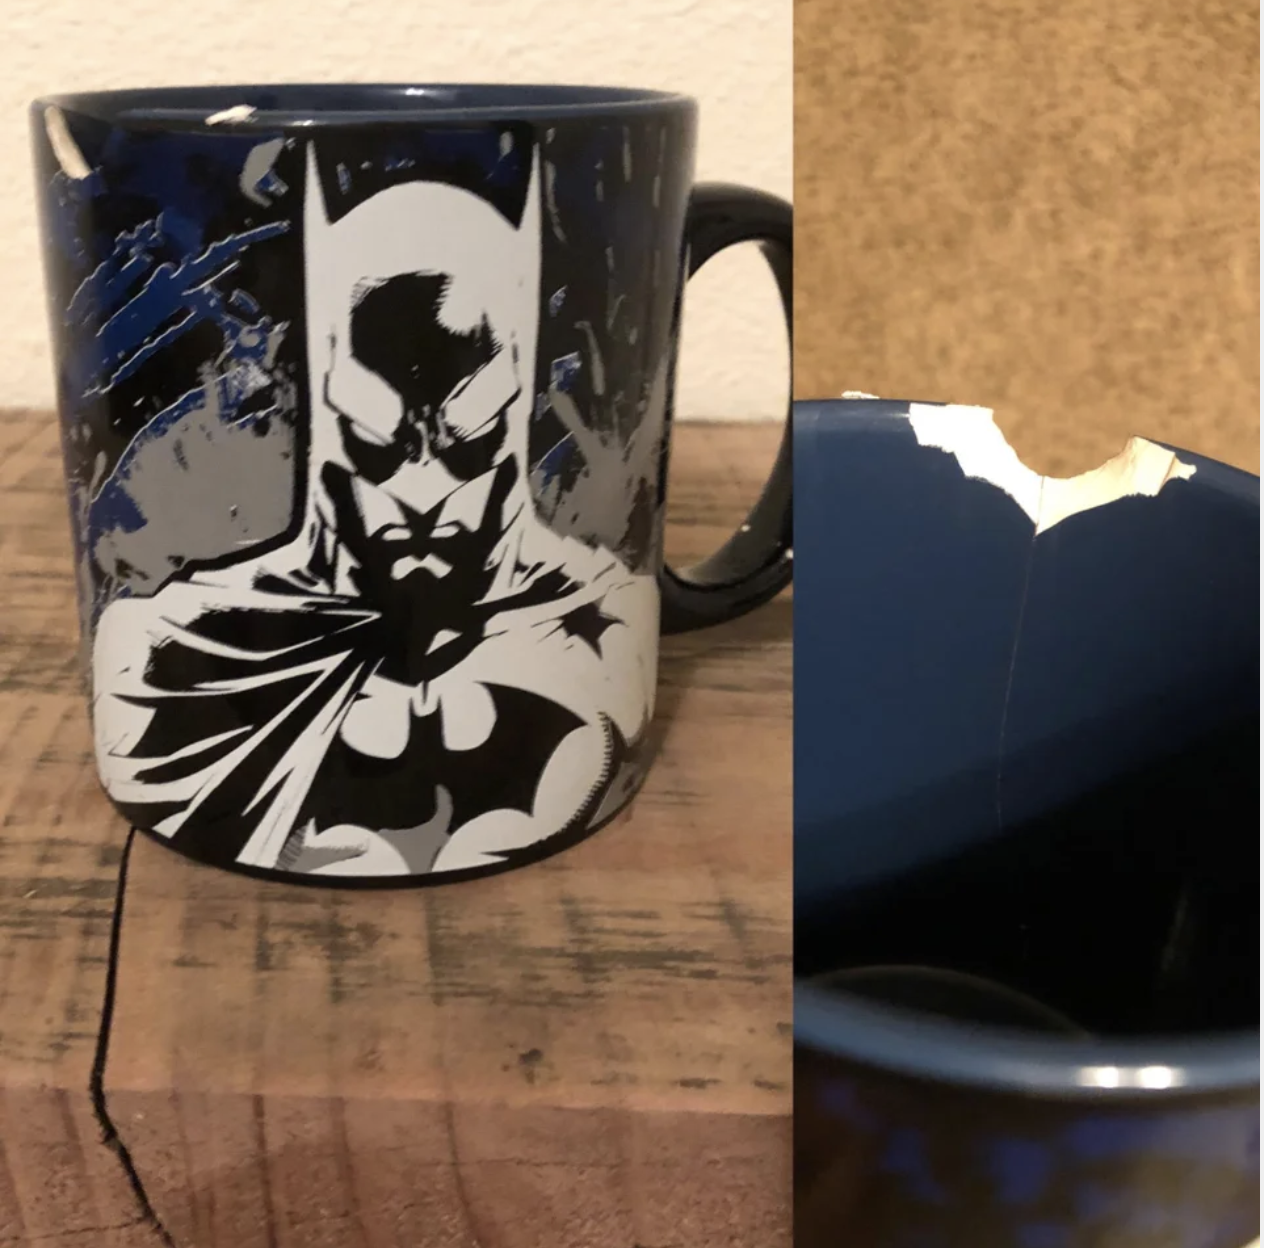 A broken Batman mug with a chipped part that looks exactly like the bat symbol